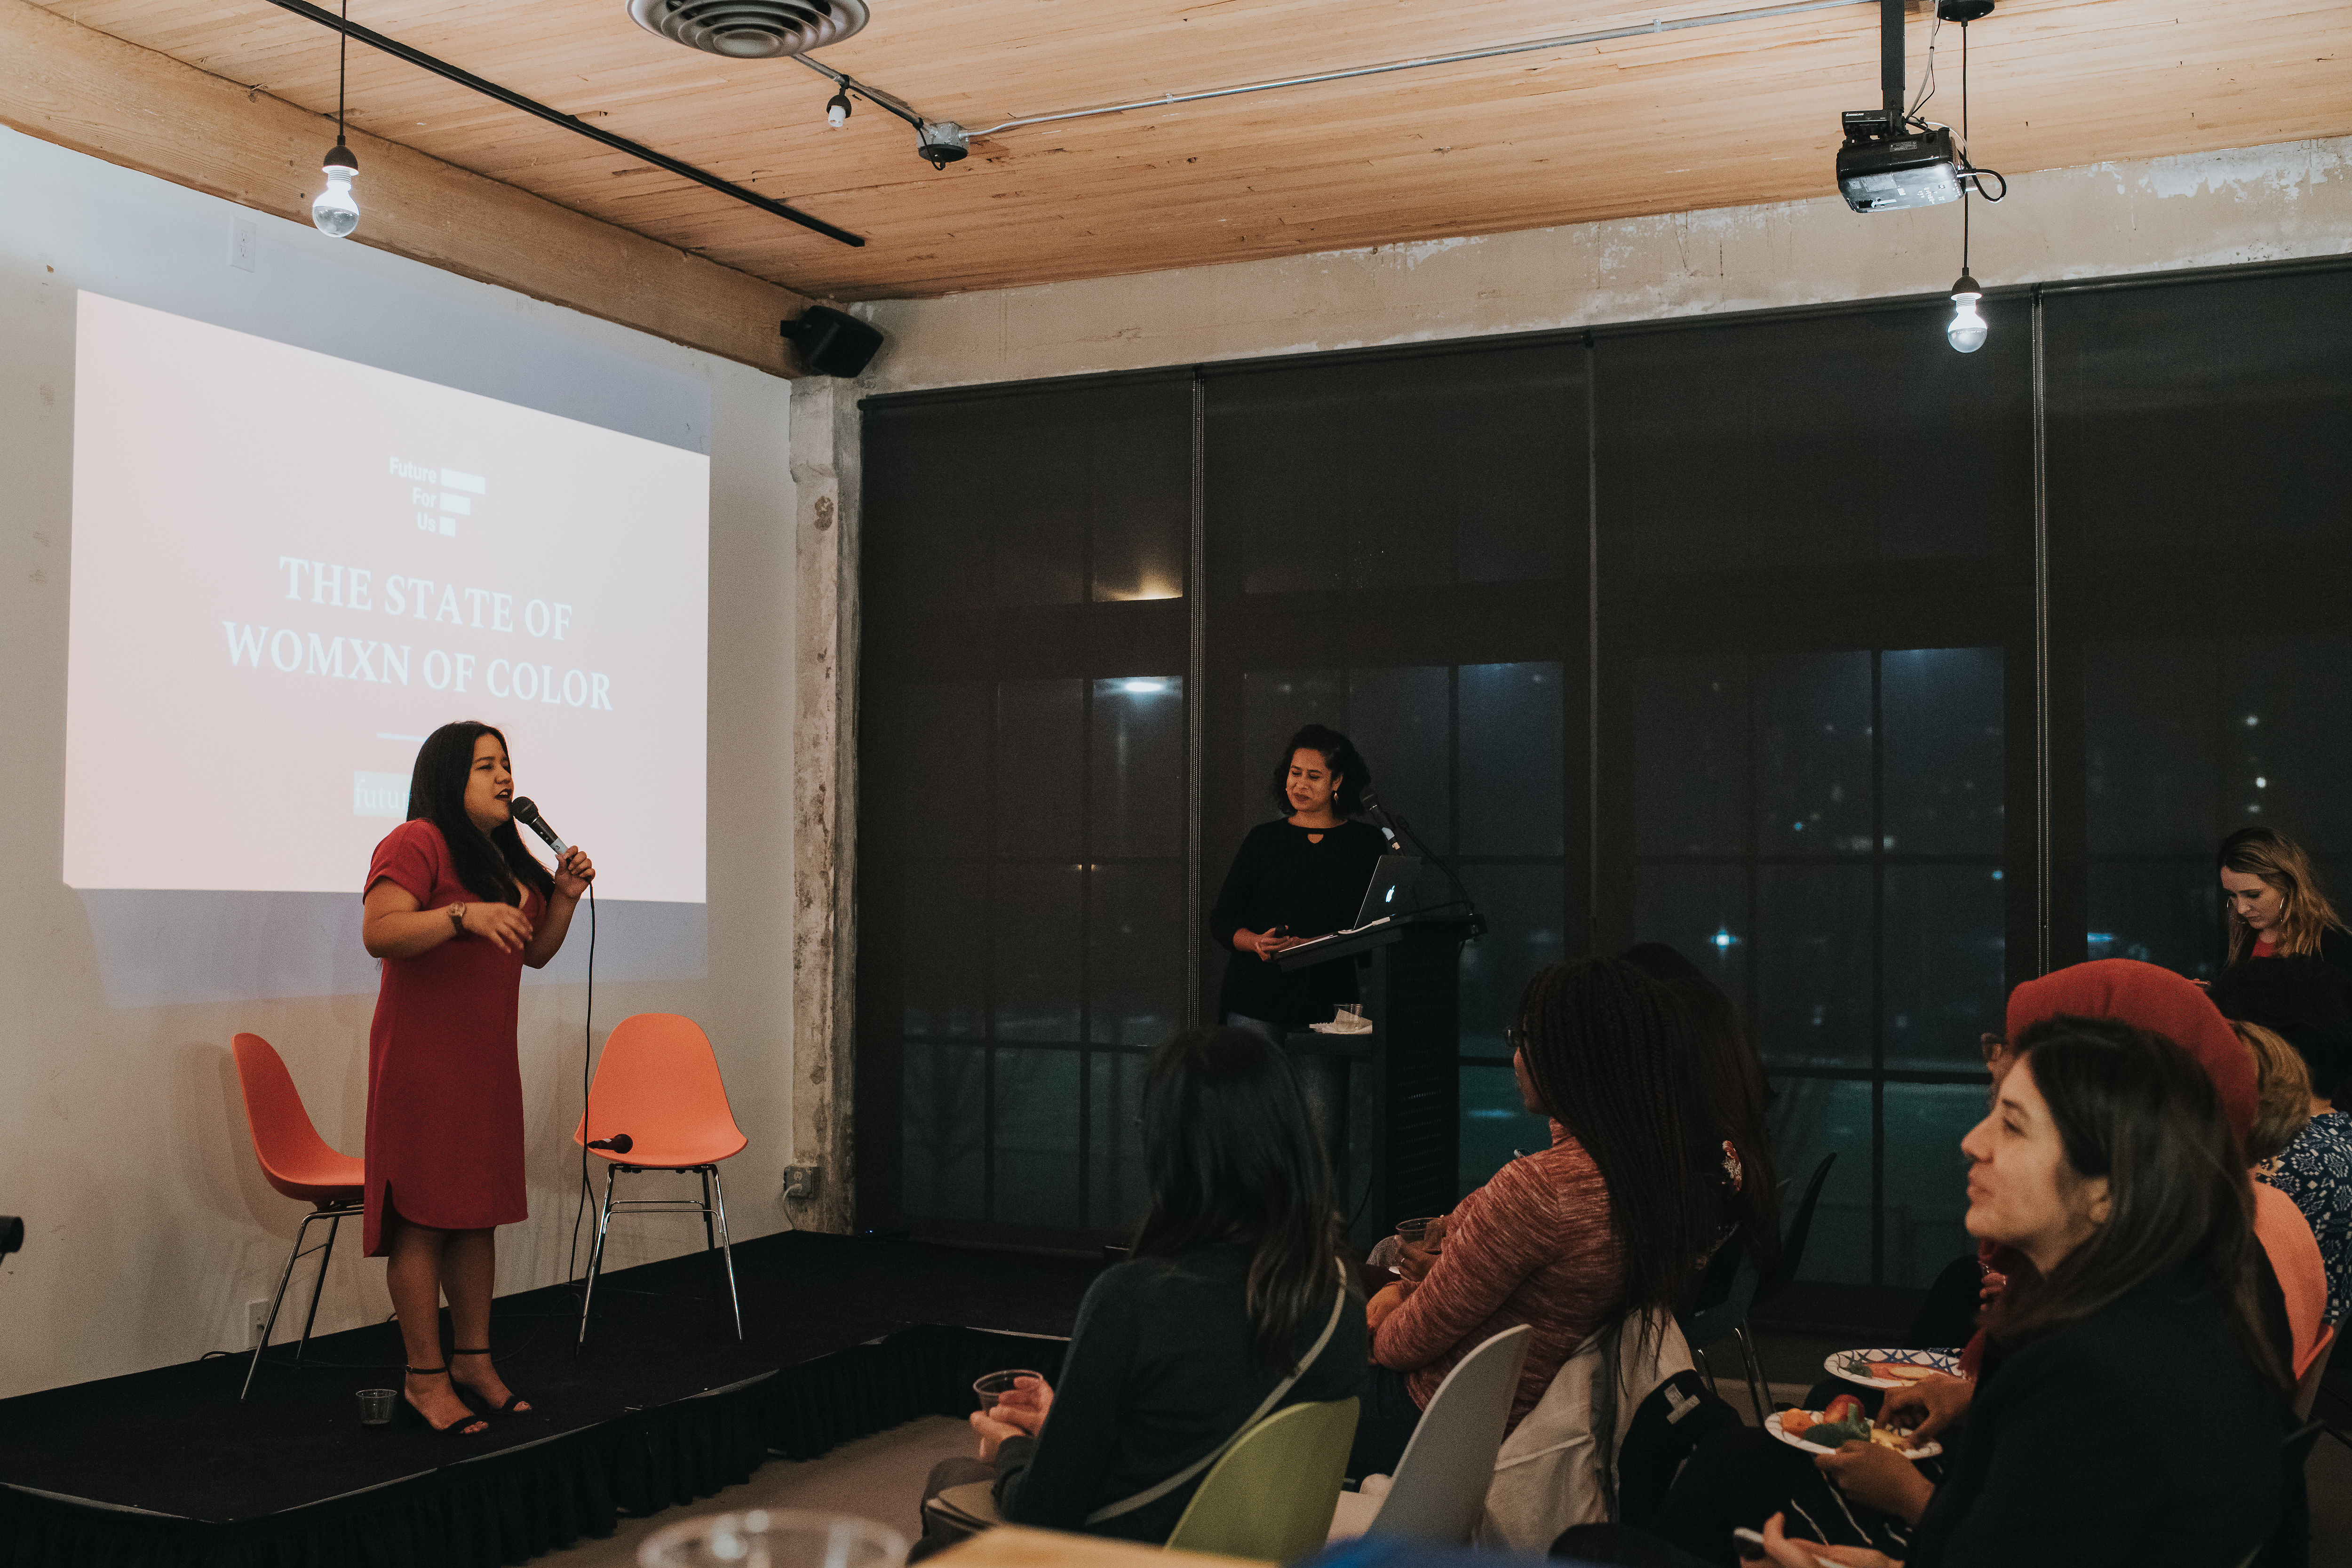 Sage Quiamno and Aparna Rae onstage speaking to women of color. Photo by Anthony Smith.